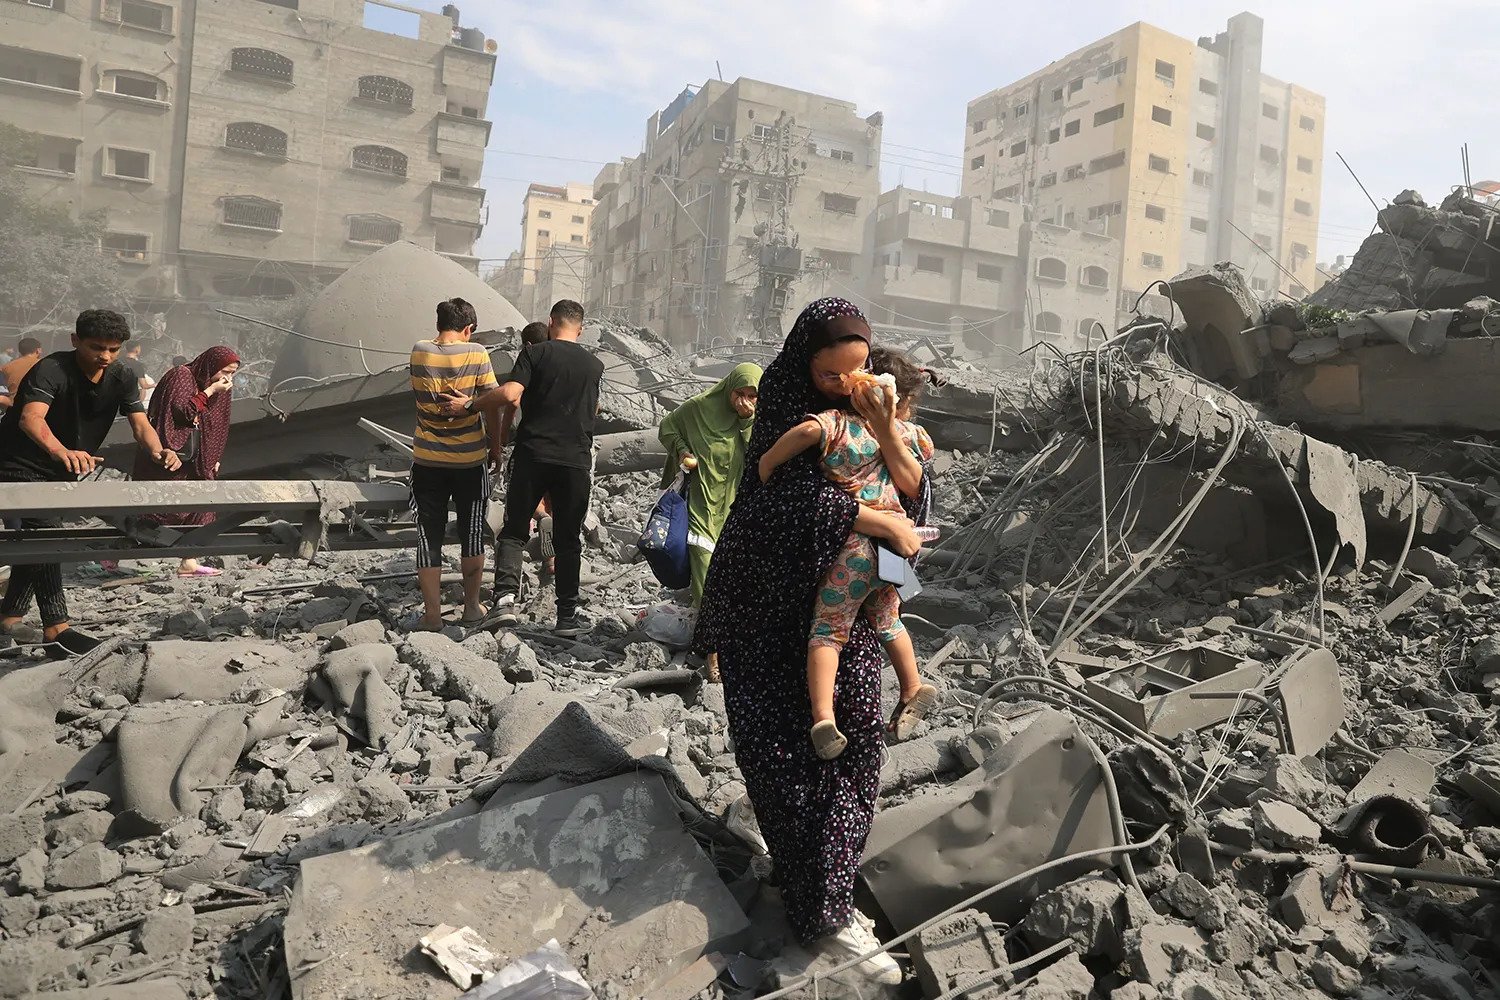 14-Year Effort to Clear Gaza Debris: UN Official Estimates 37 Million Tons of Rubble and Unexploded Ordinance